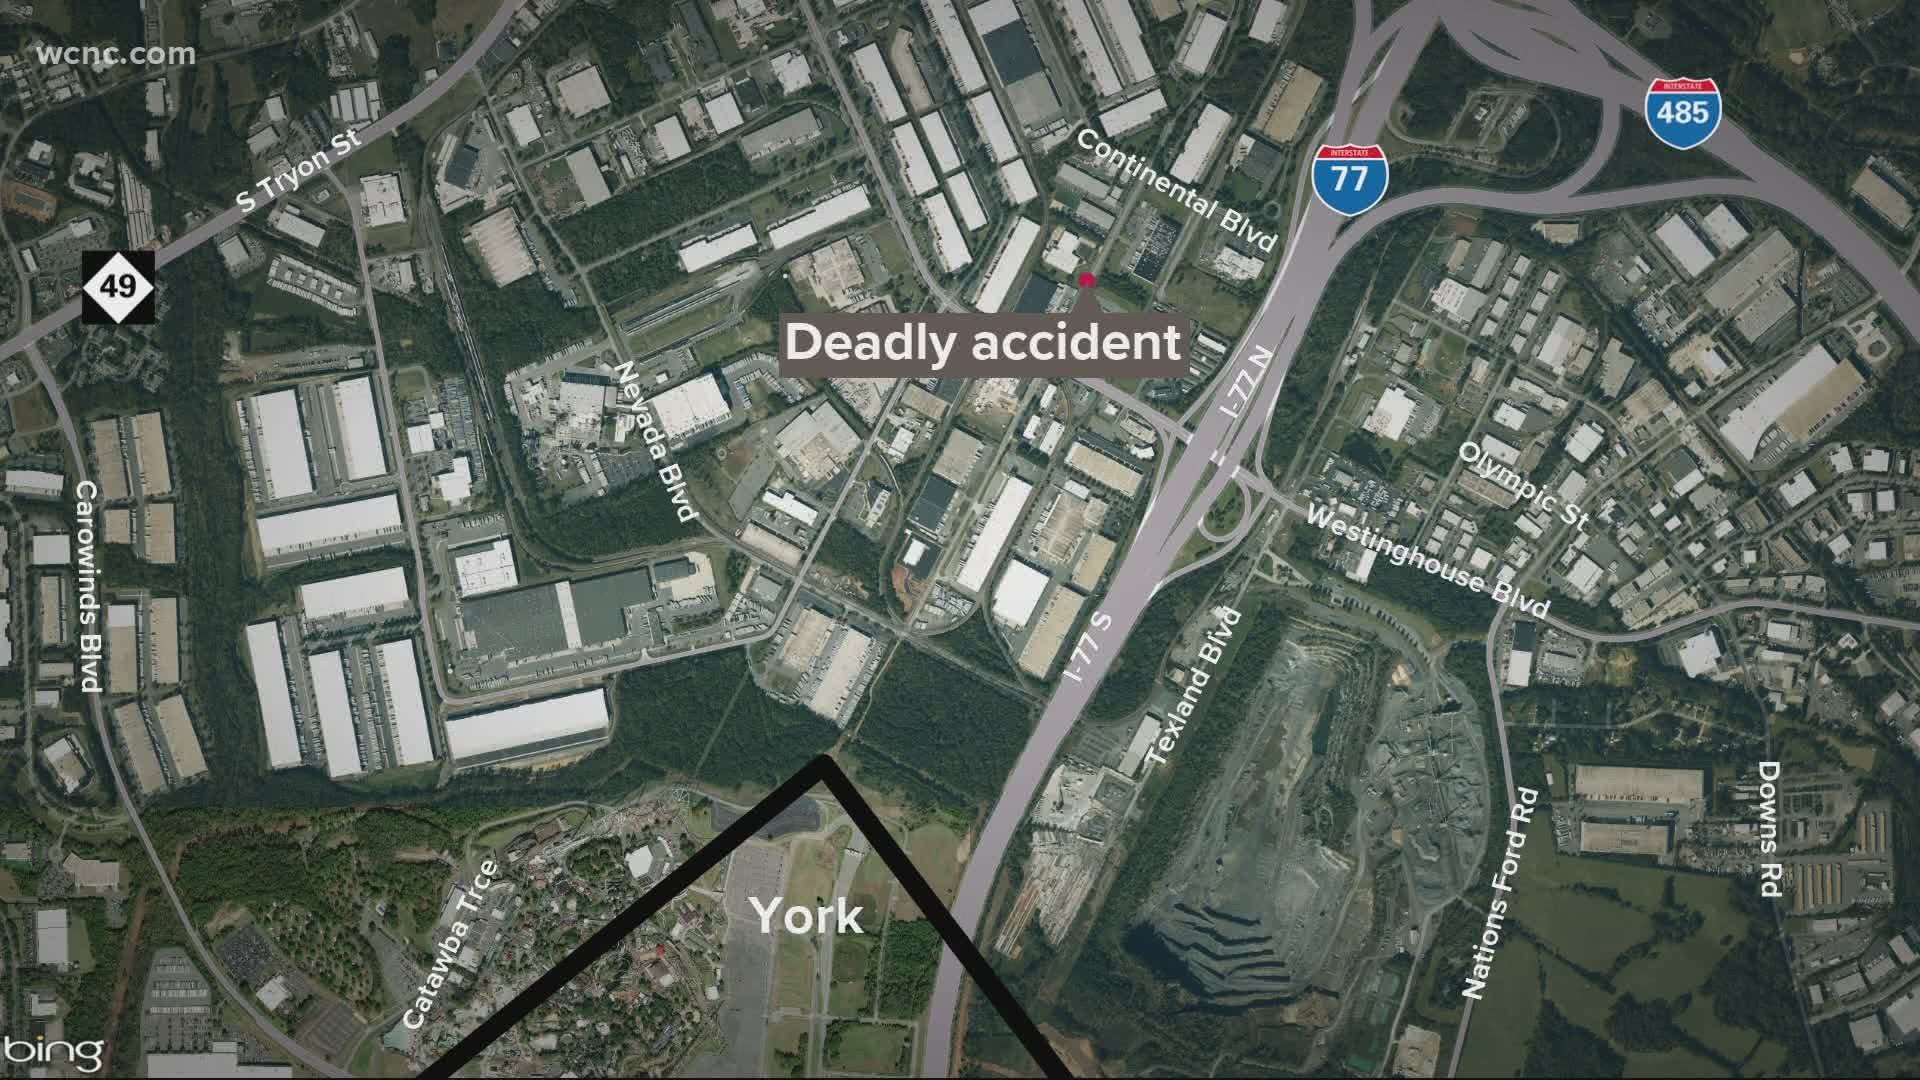 Police say the worker was killed after being hit by a car just after 6 a.m. on Saturday.